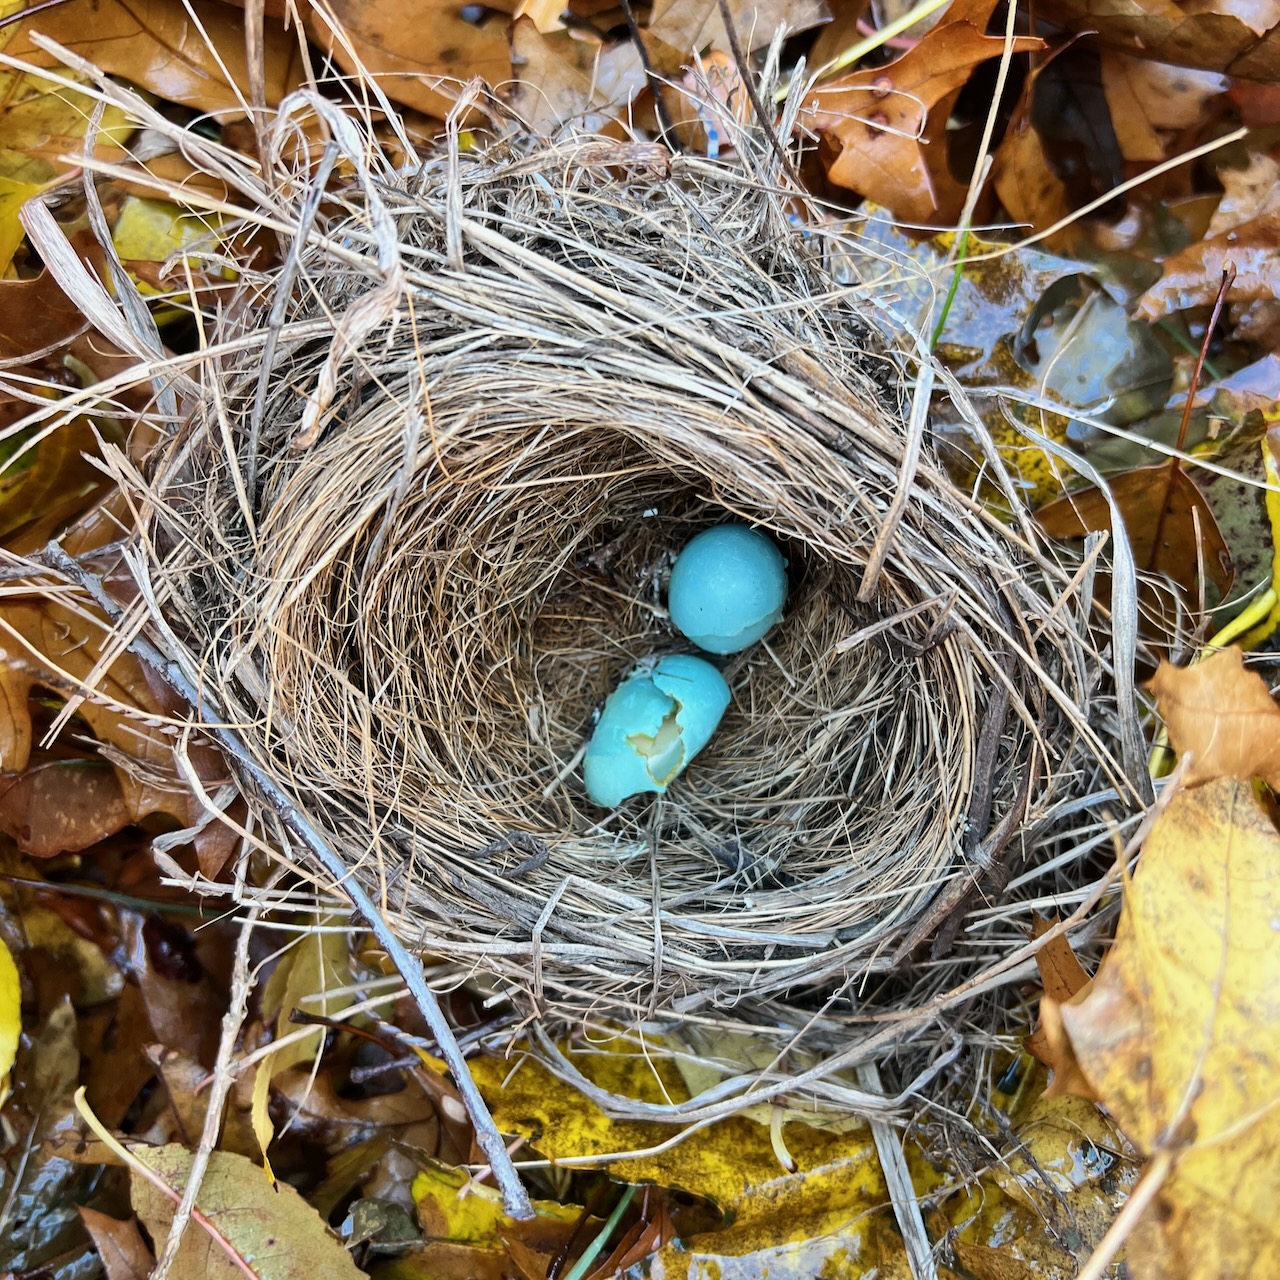 A bird’s nest with broken eggs on top of a pile of leaves.